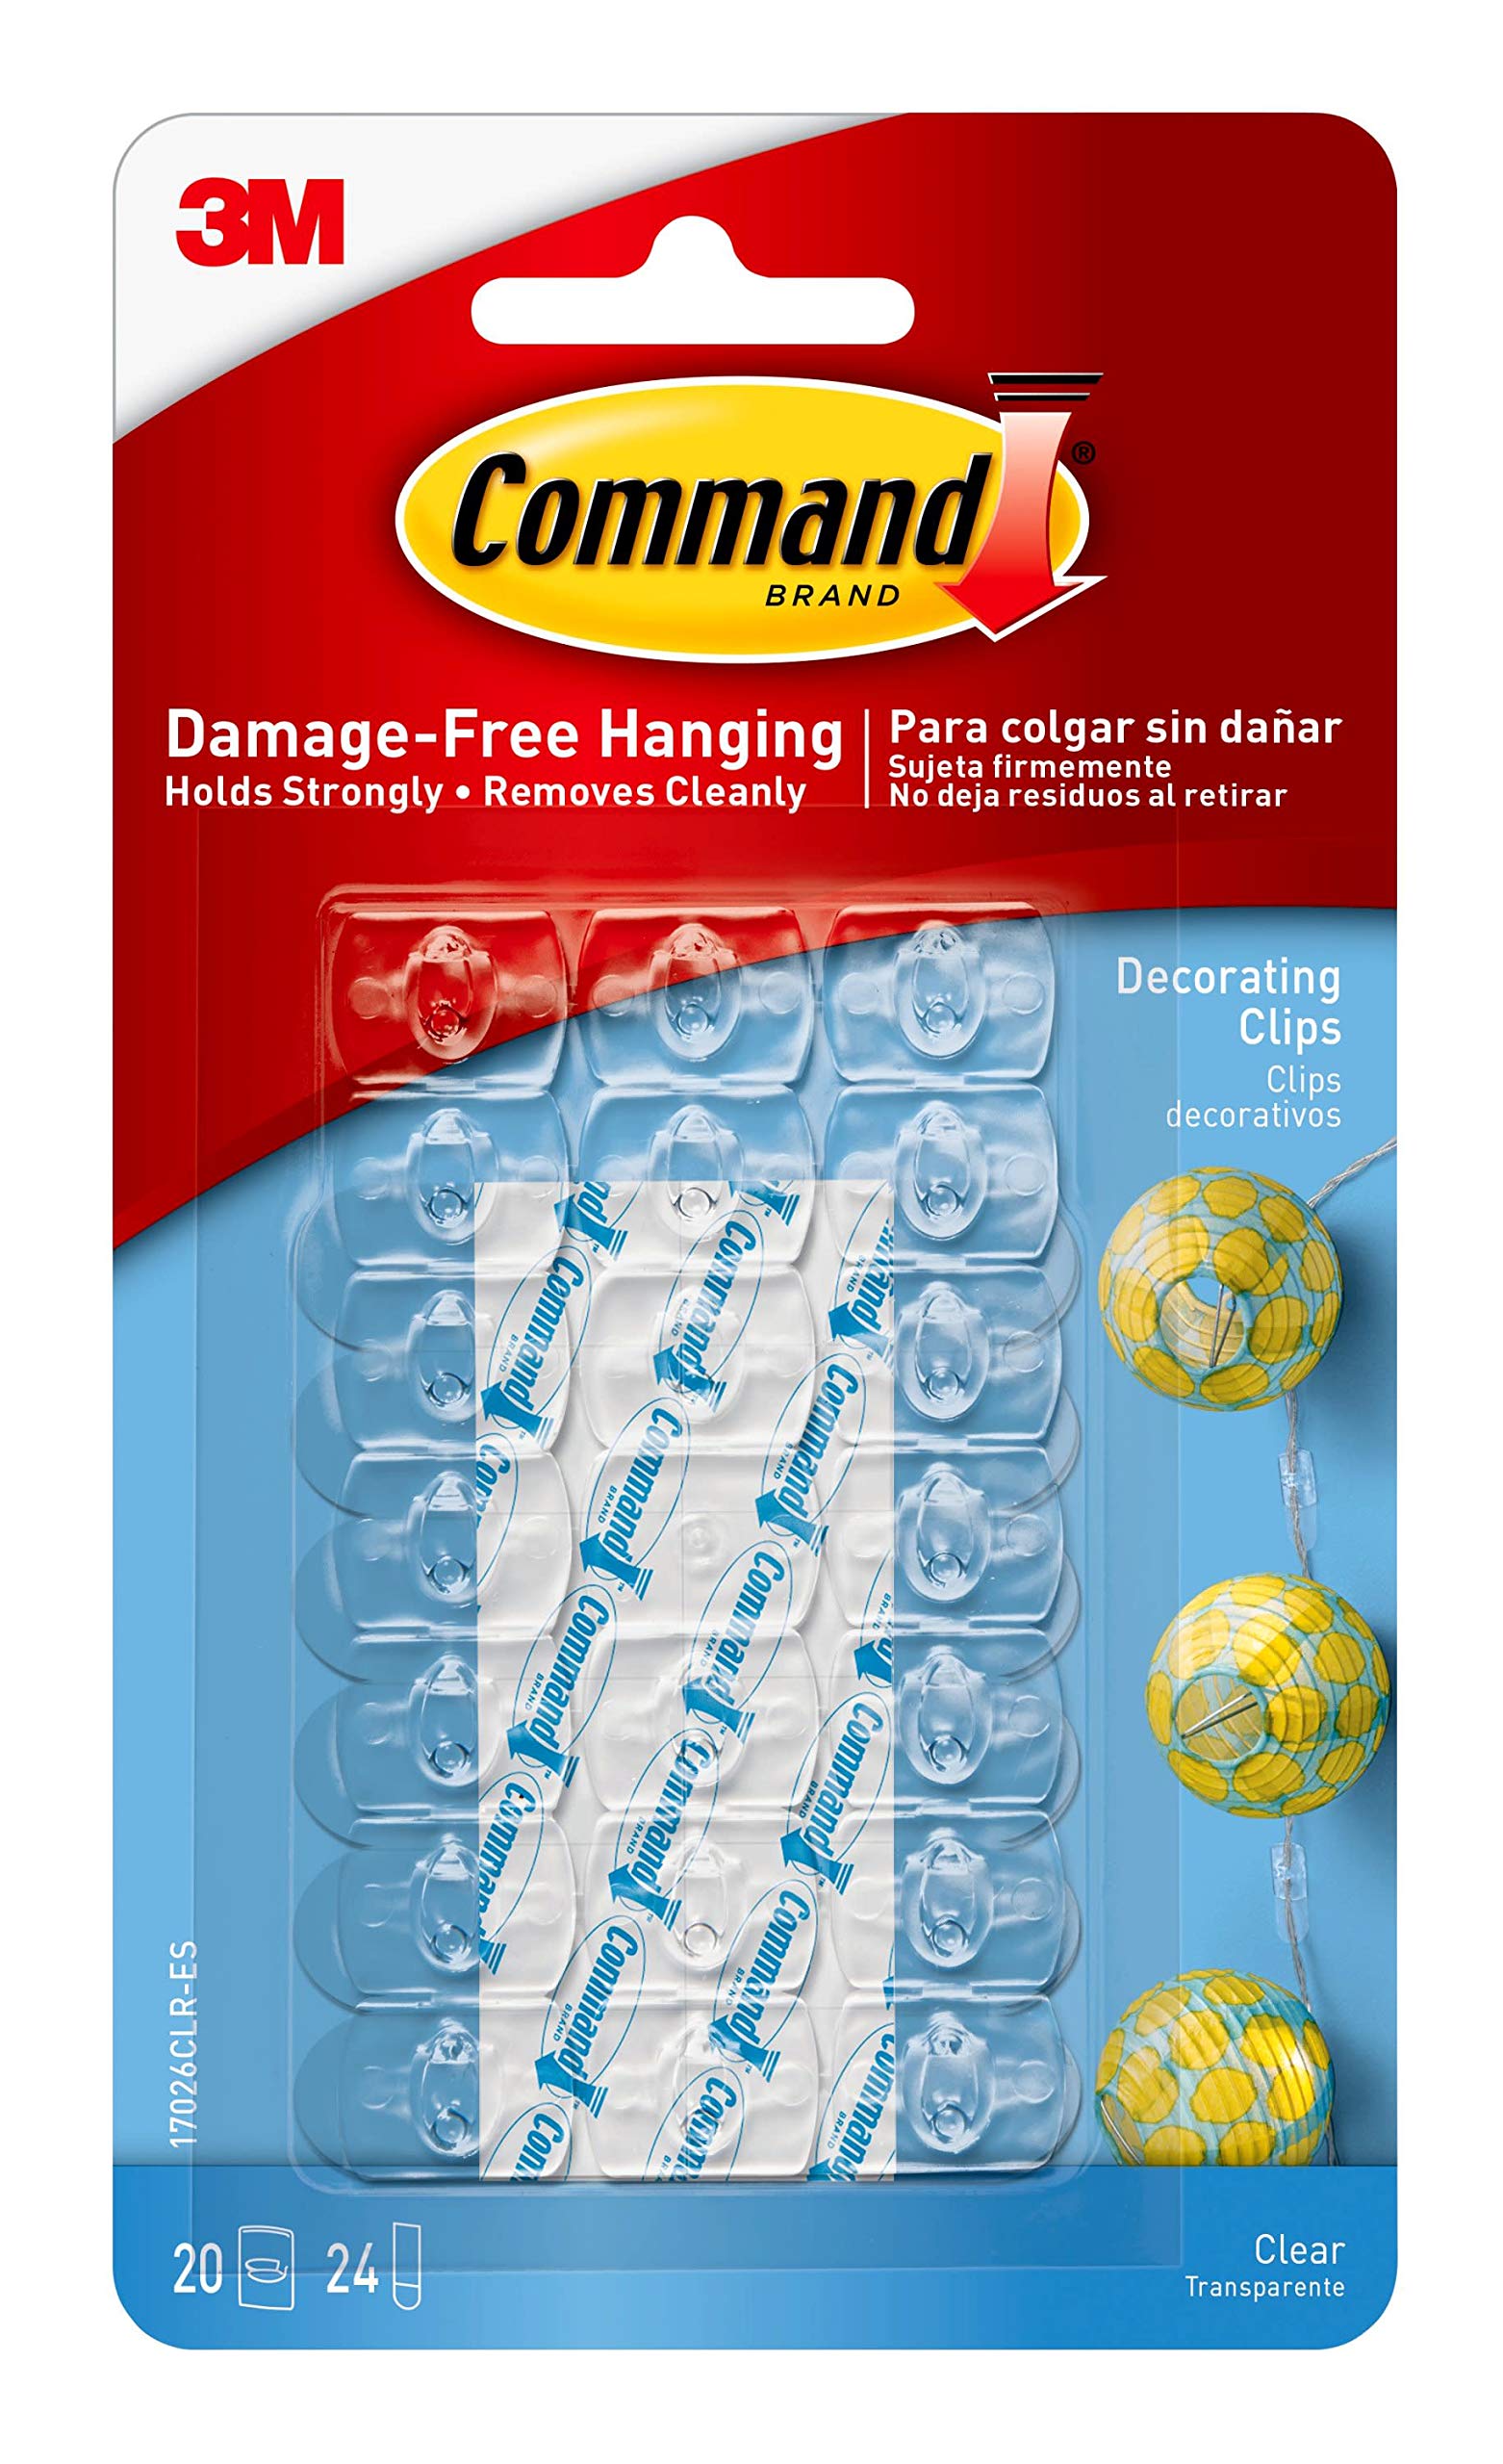 3M Command, Clear Decorating & organizing wall hooks, Holds Strongly, Reusable, Adhesive hooks for wall, Multi-surface damage free hooks for hanging (Transparent, 20 clips, 24 strips)